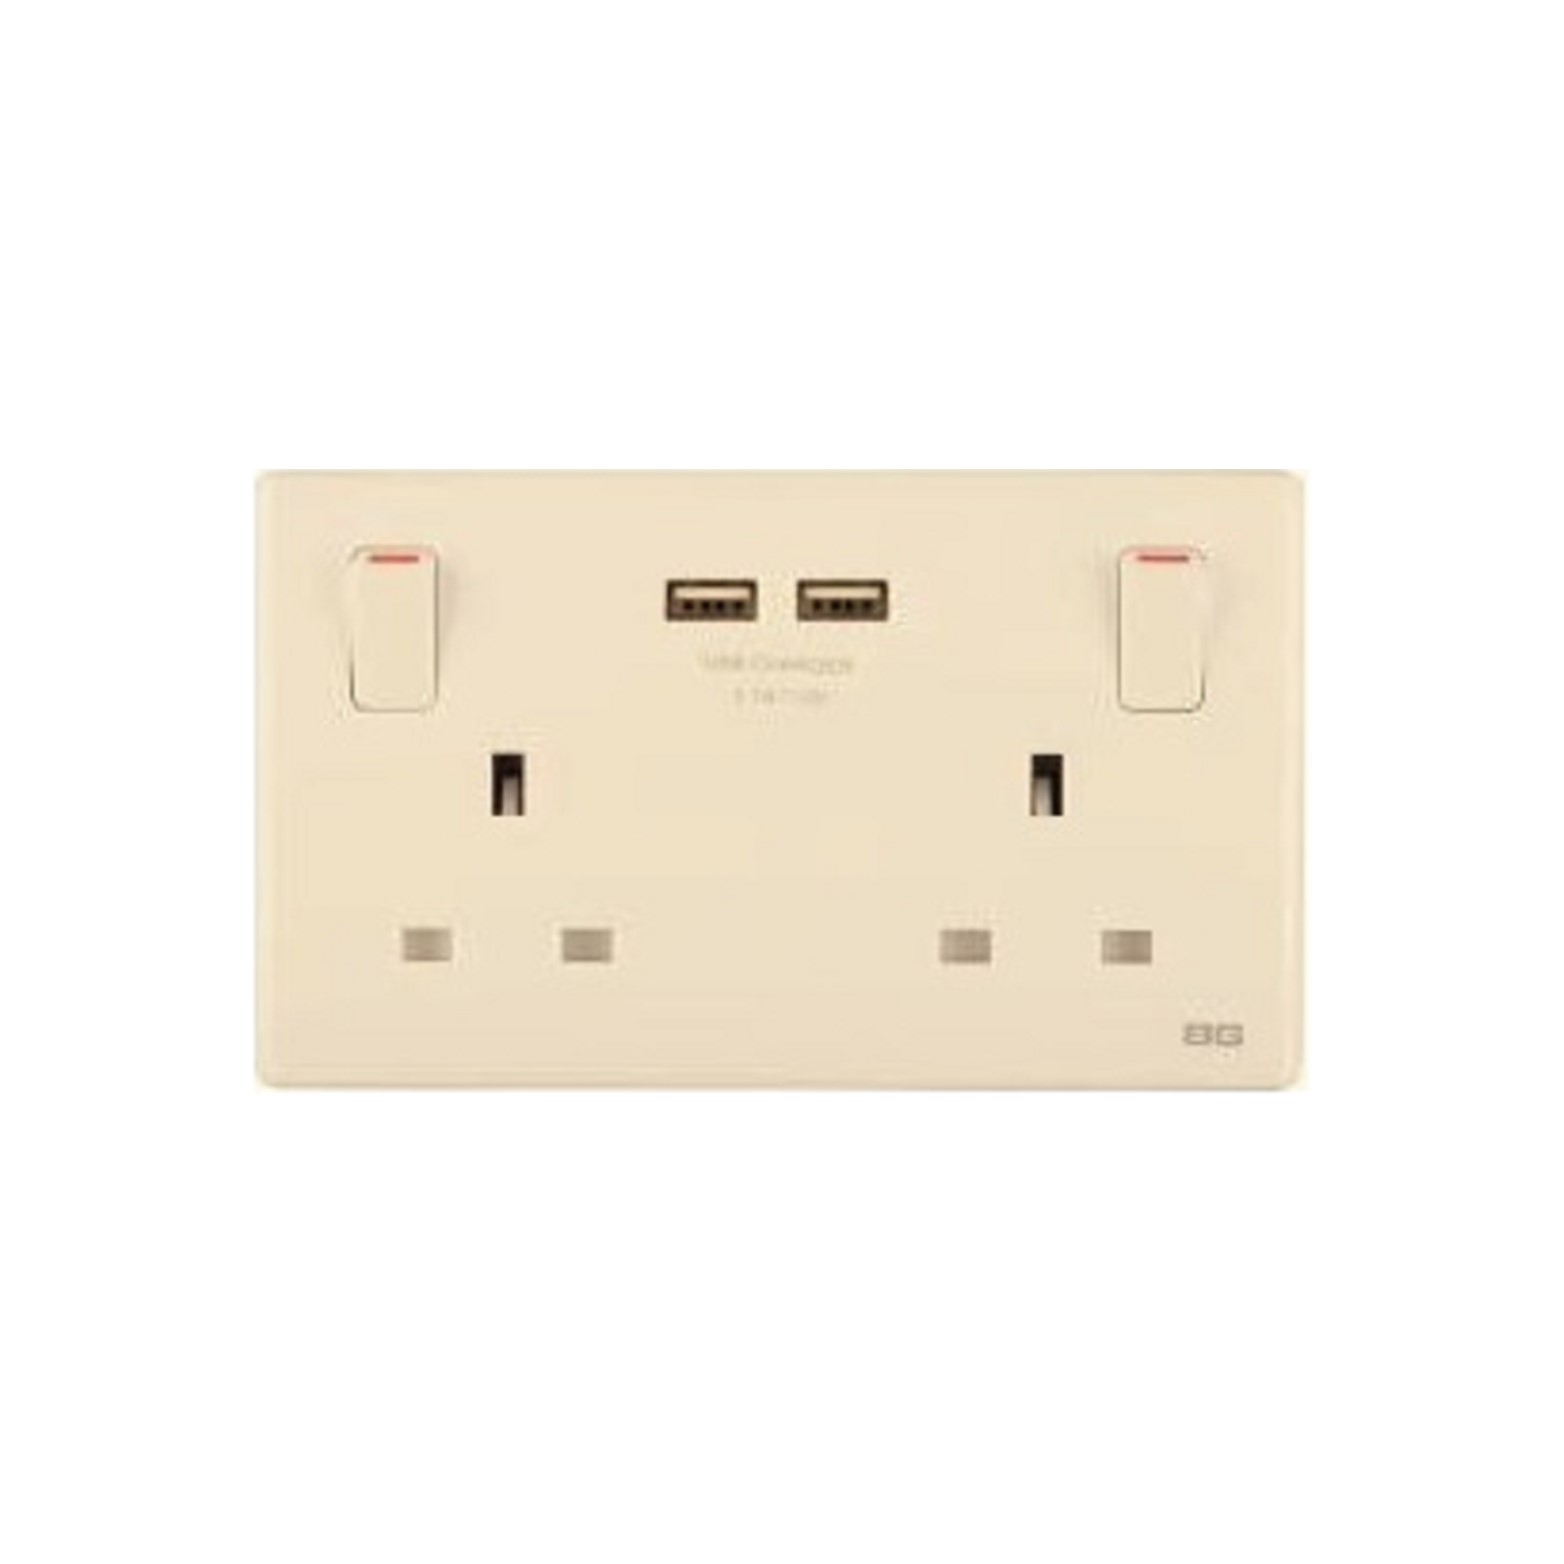 Champagne SlimLine 2USB 3.1A 2-Gang 13A Switched Socket, USB Charger 86 type wall BS/UK (PCCH22U3)